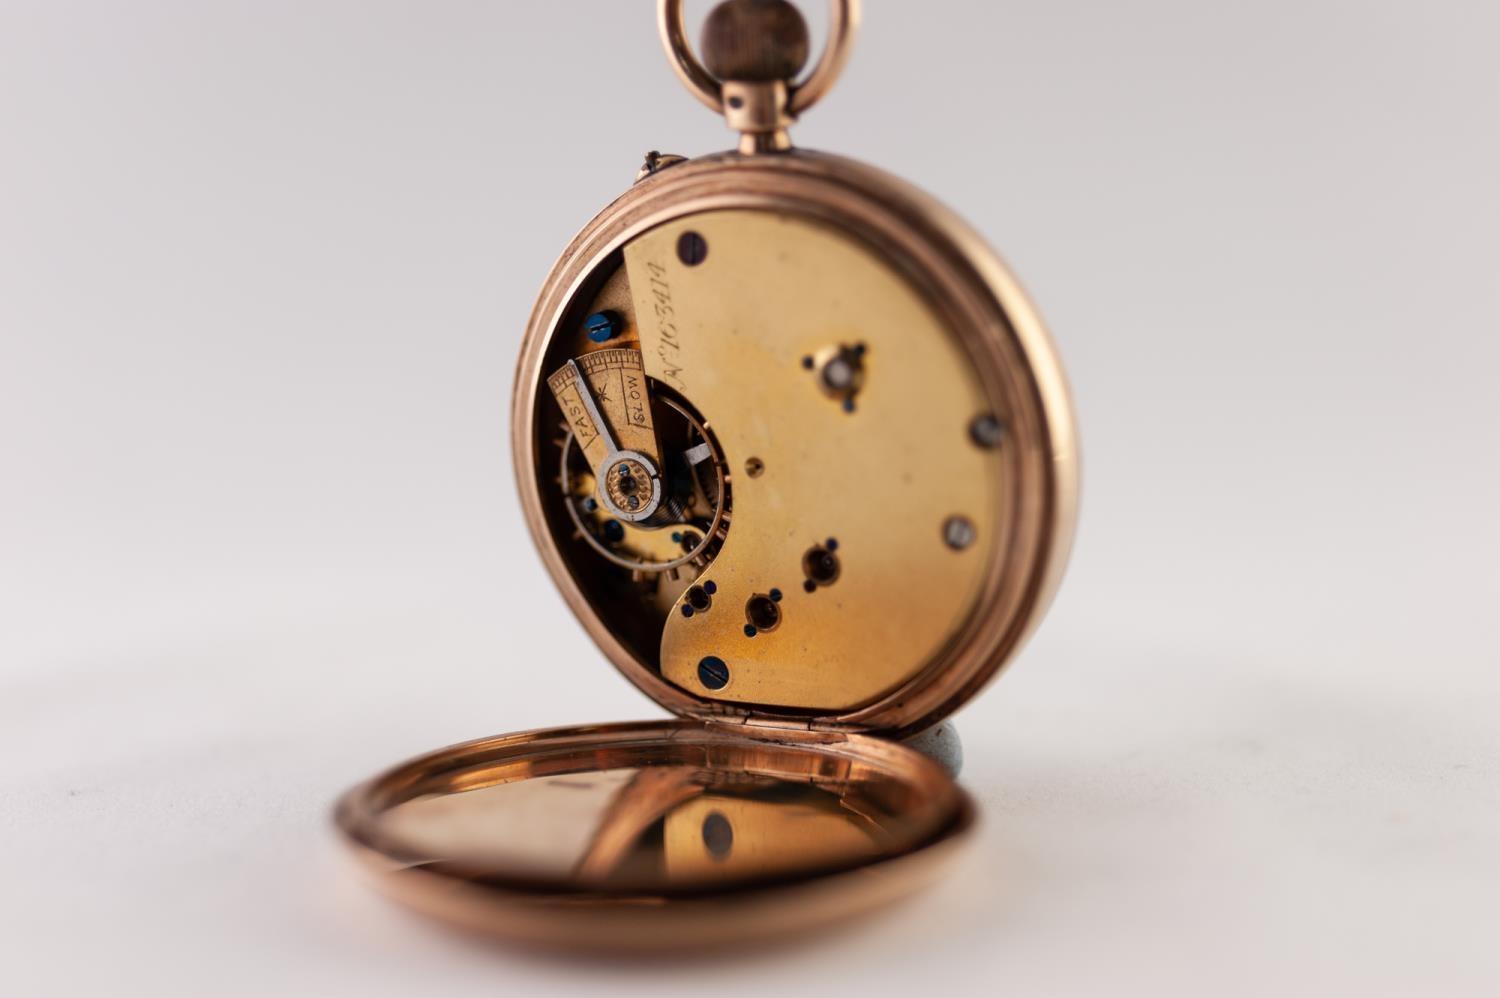 HEAVY 9ct GOLD OPEN FACED POCKET WATCH with 15 jewels English lever movement, white roman dial, - Image 2 of 2